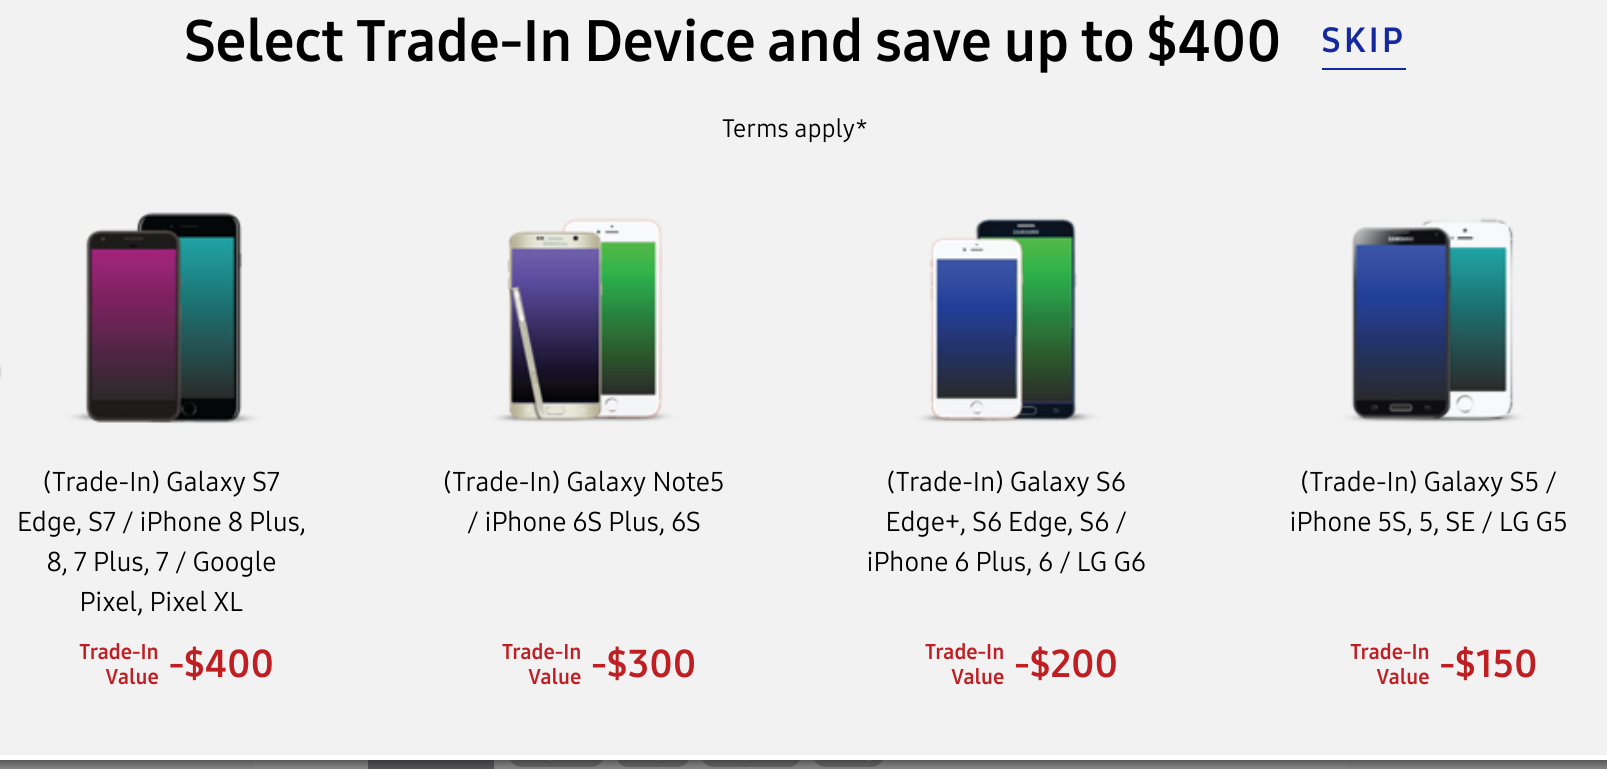 Receive up to $400 in instant credit with certain trade-ins toward the Samsung Galaxy S8, Galaxy S8+ and the Galaxy Note 8 - Save up to $400 instantly on the Galaxy S8/S8+ or Galaxy Note 8 with a trade-in of certain models